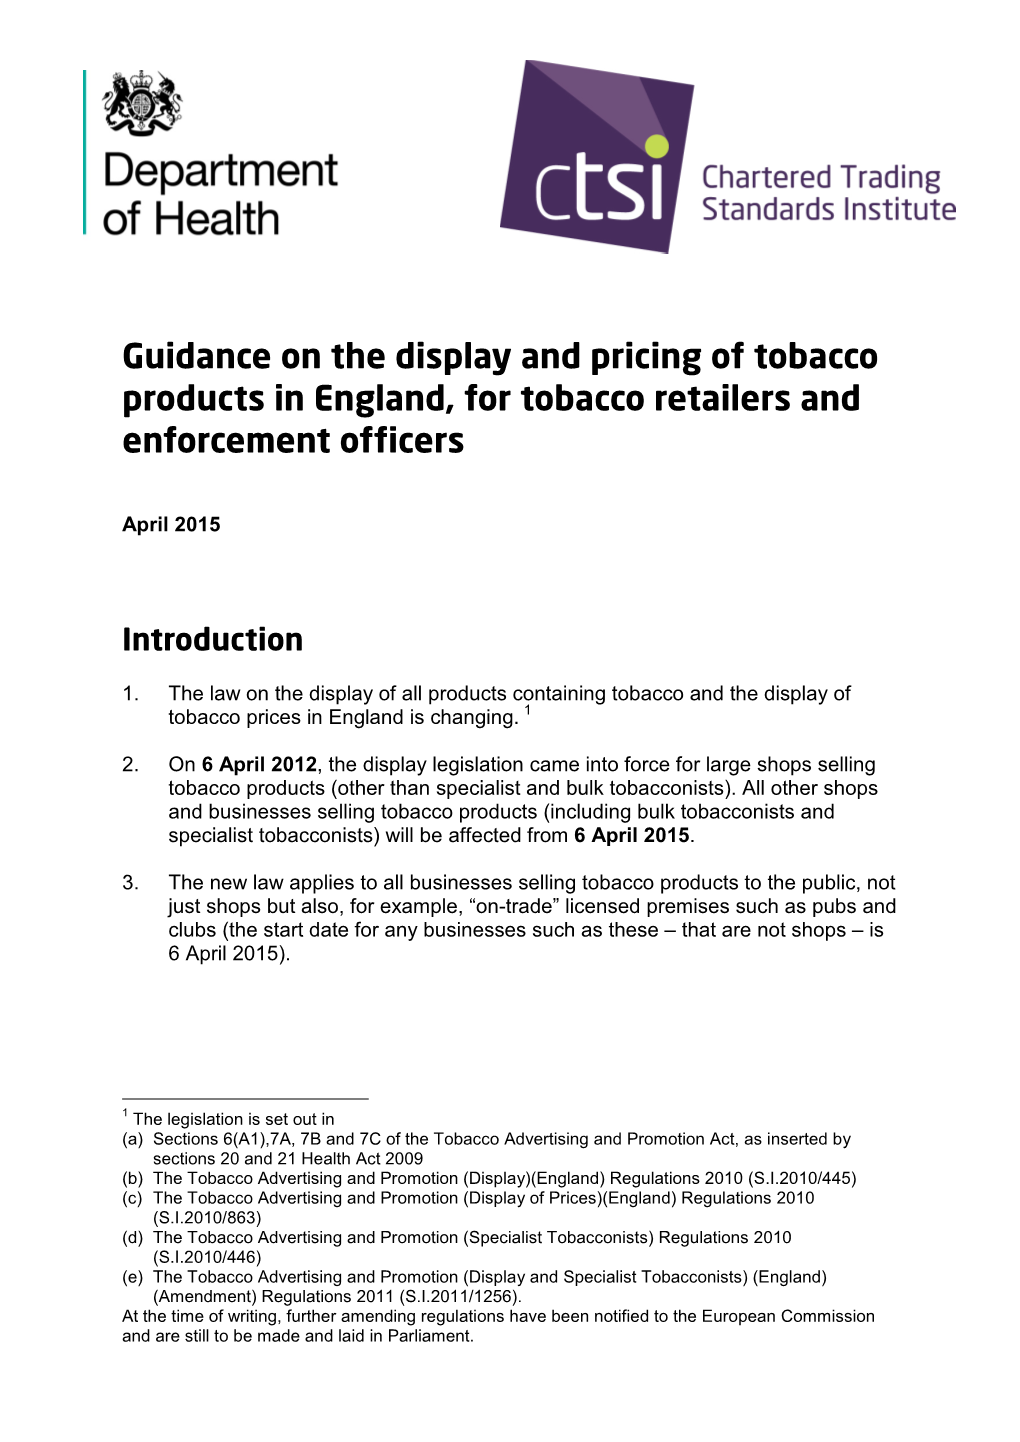 Guidance on the Display and Pricing of Tobacco Products in England, for Tobacco Retailers and Enforcement Officers